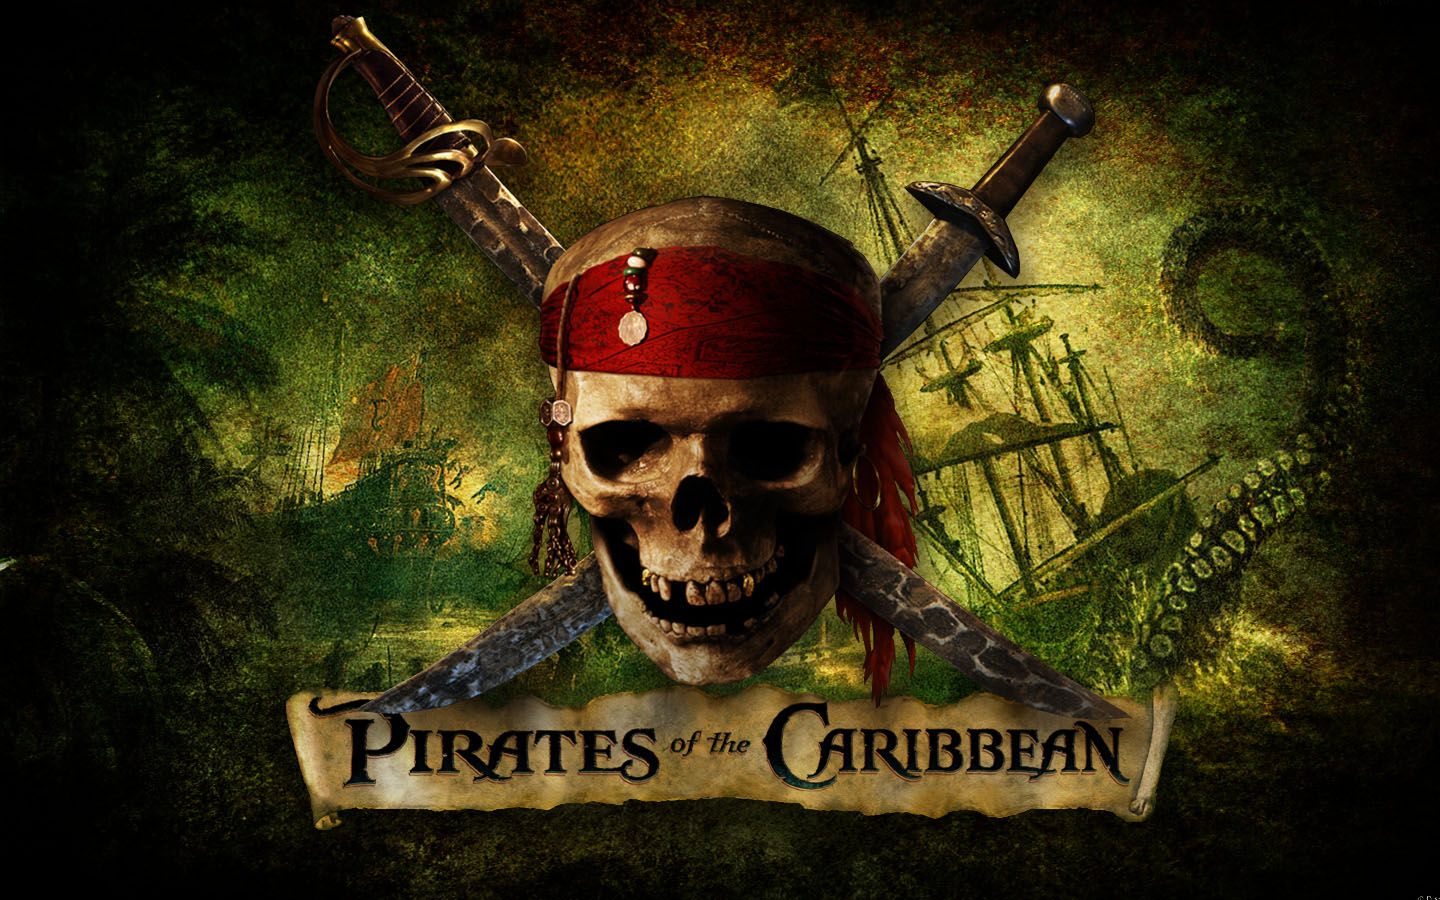 Pirates The Caribbean Hd Wallpapers - Pirate Of The Caribbean Wallpaper Hd  - 1440x900 Wallpaper 